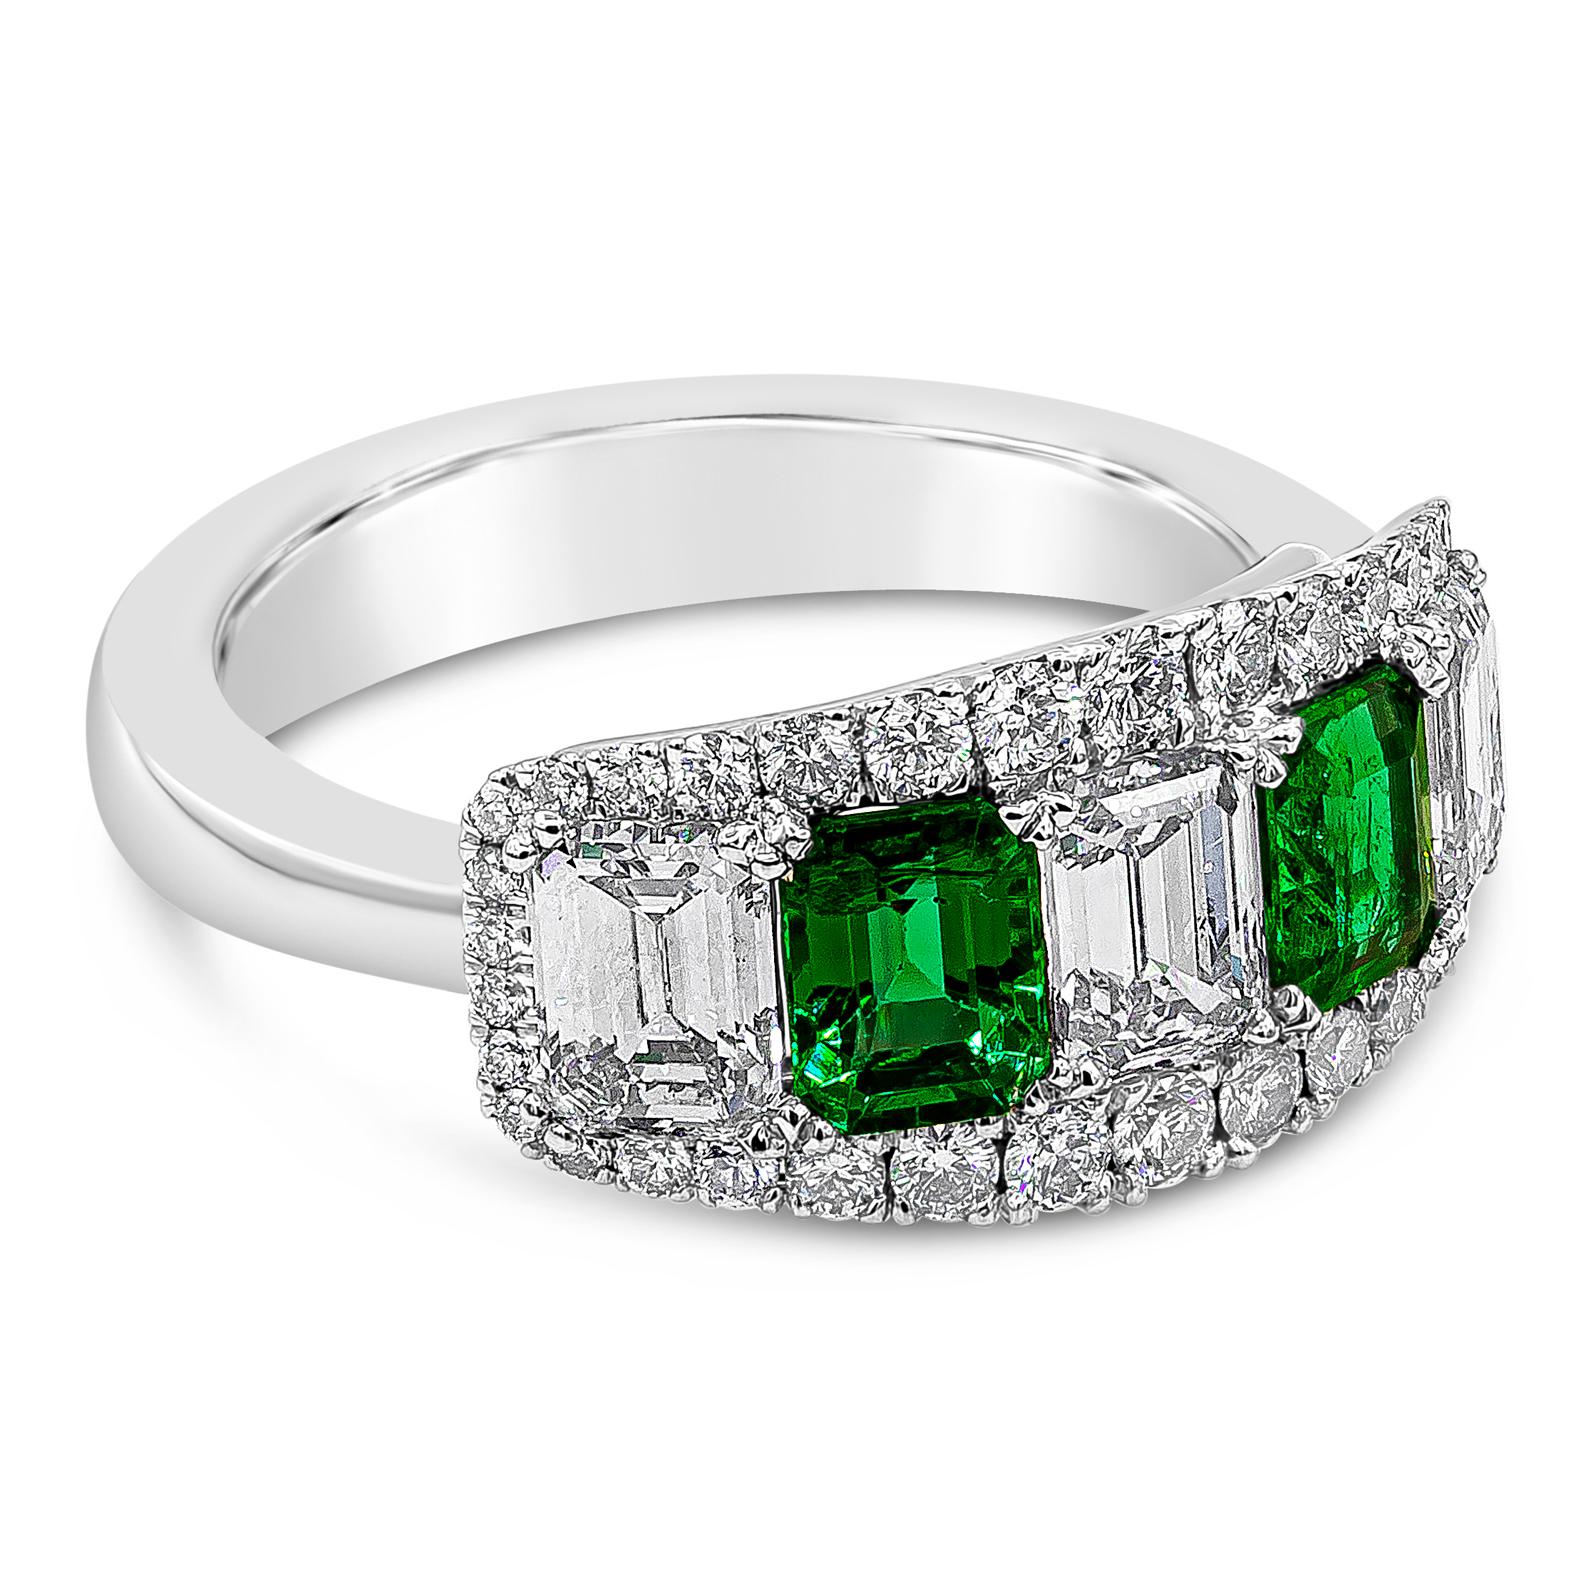 A magnificent five stone ring features emerald cut green emerald and diamonds elegantly alternating, finished with a row of brilliant round diamonds. Green emeralds weighs 0.85 carats, emerald cut diamonds weighs 1.50 carats total, G-H Color and VS